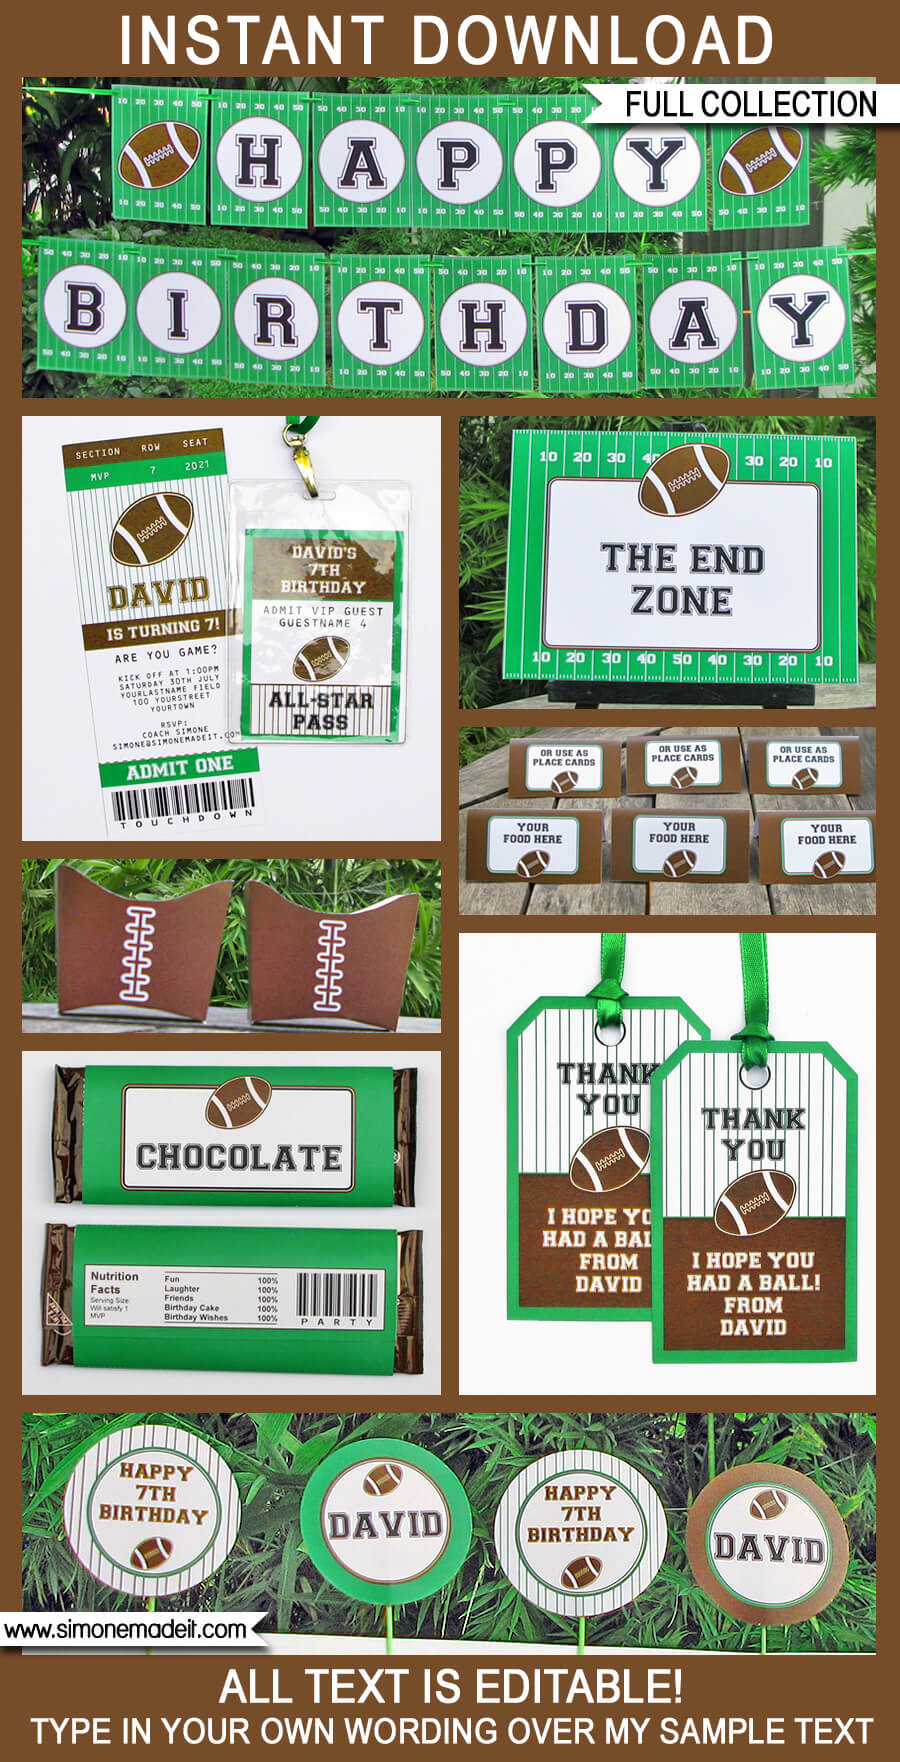 Football Party Printables, Invitations & Decorations | Tailgate Party | Birthday Party | Editable Theme Templates | INSTANT DOWNLOAD $12.50 via SIMONEmadeit.com